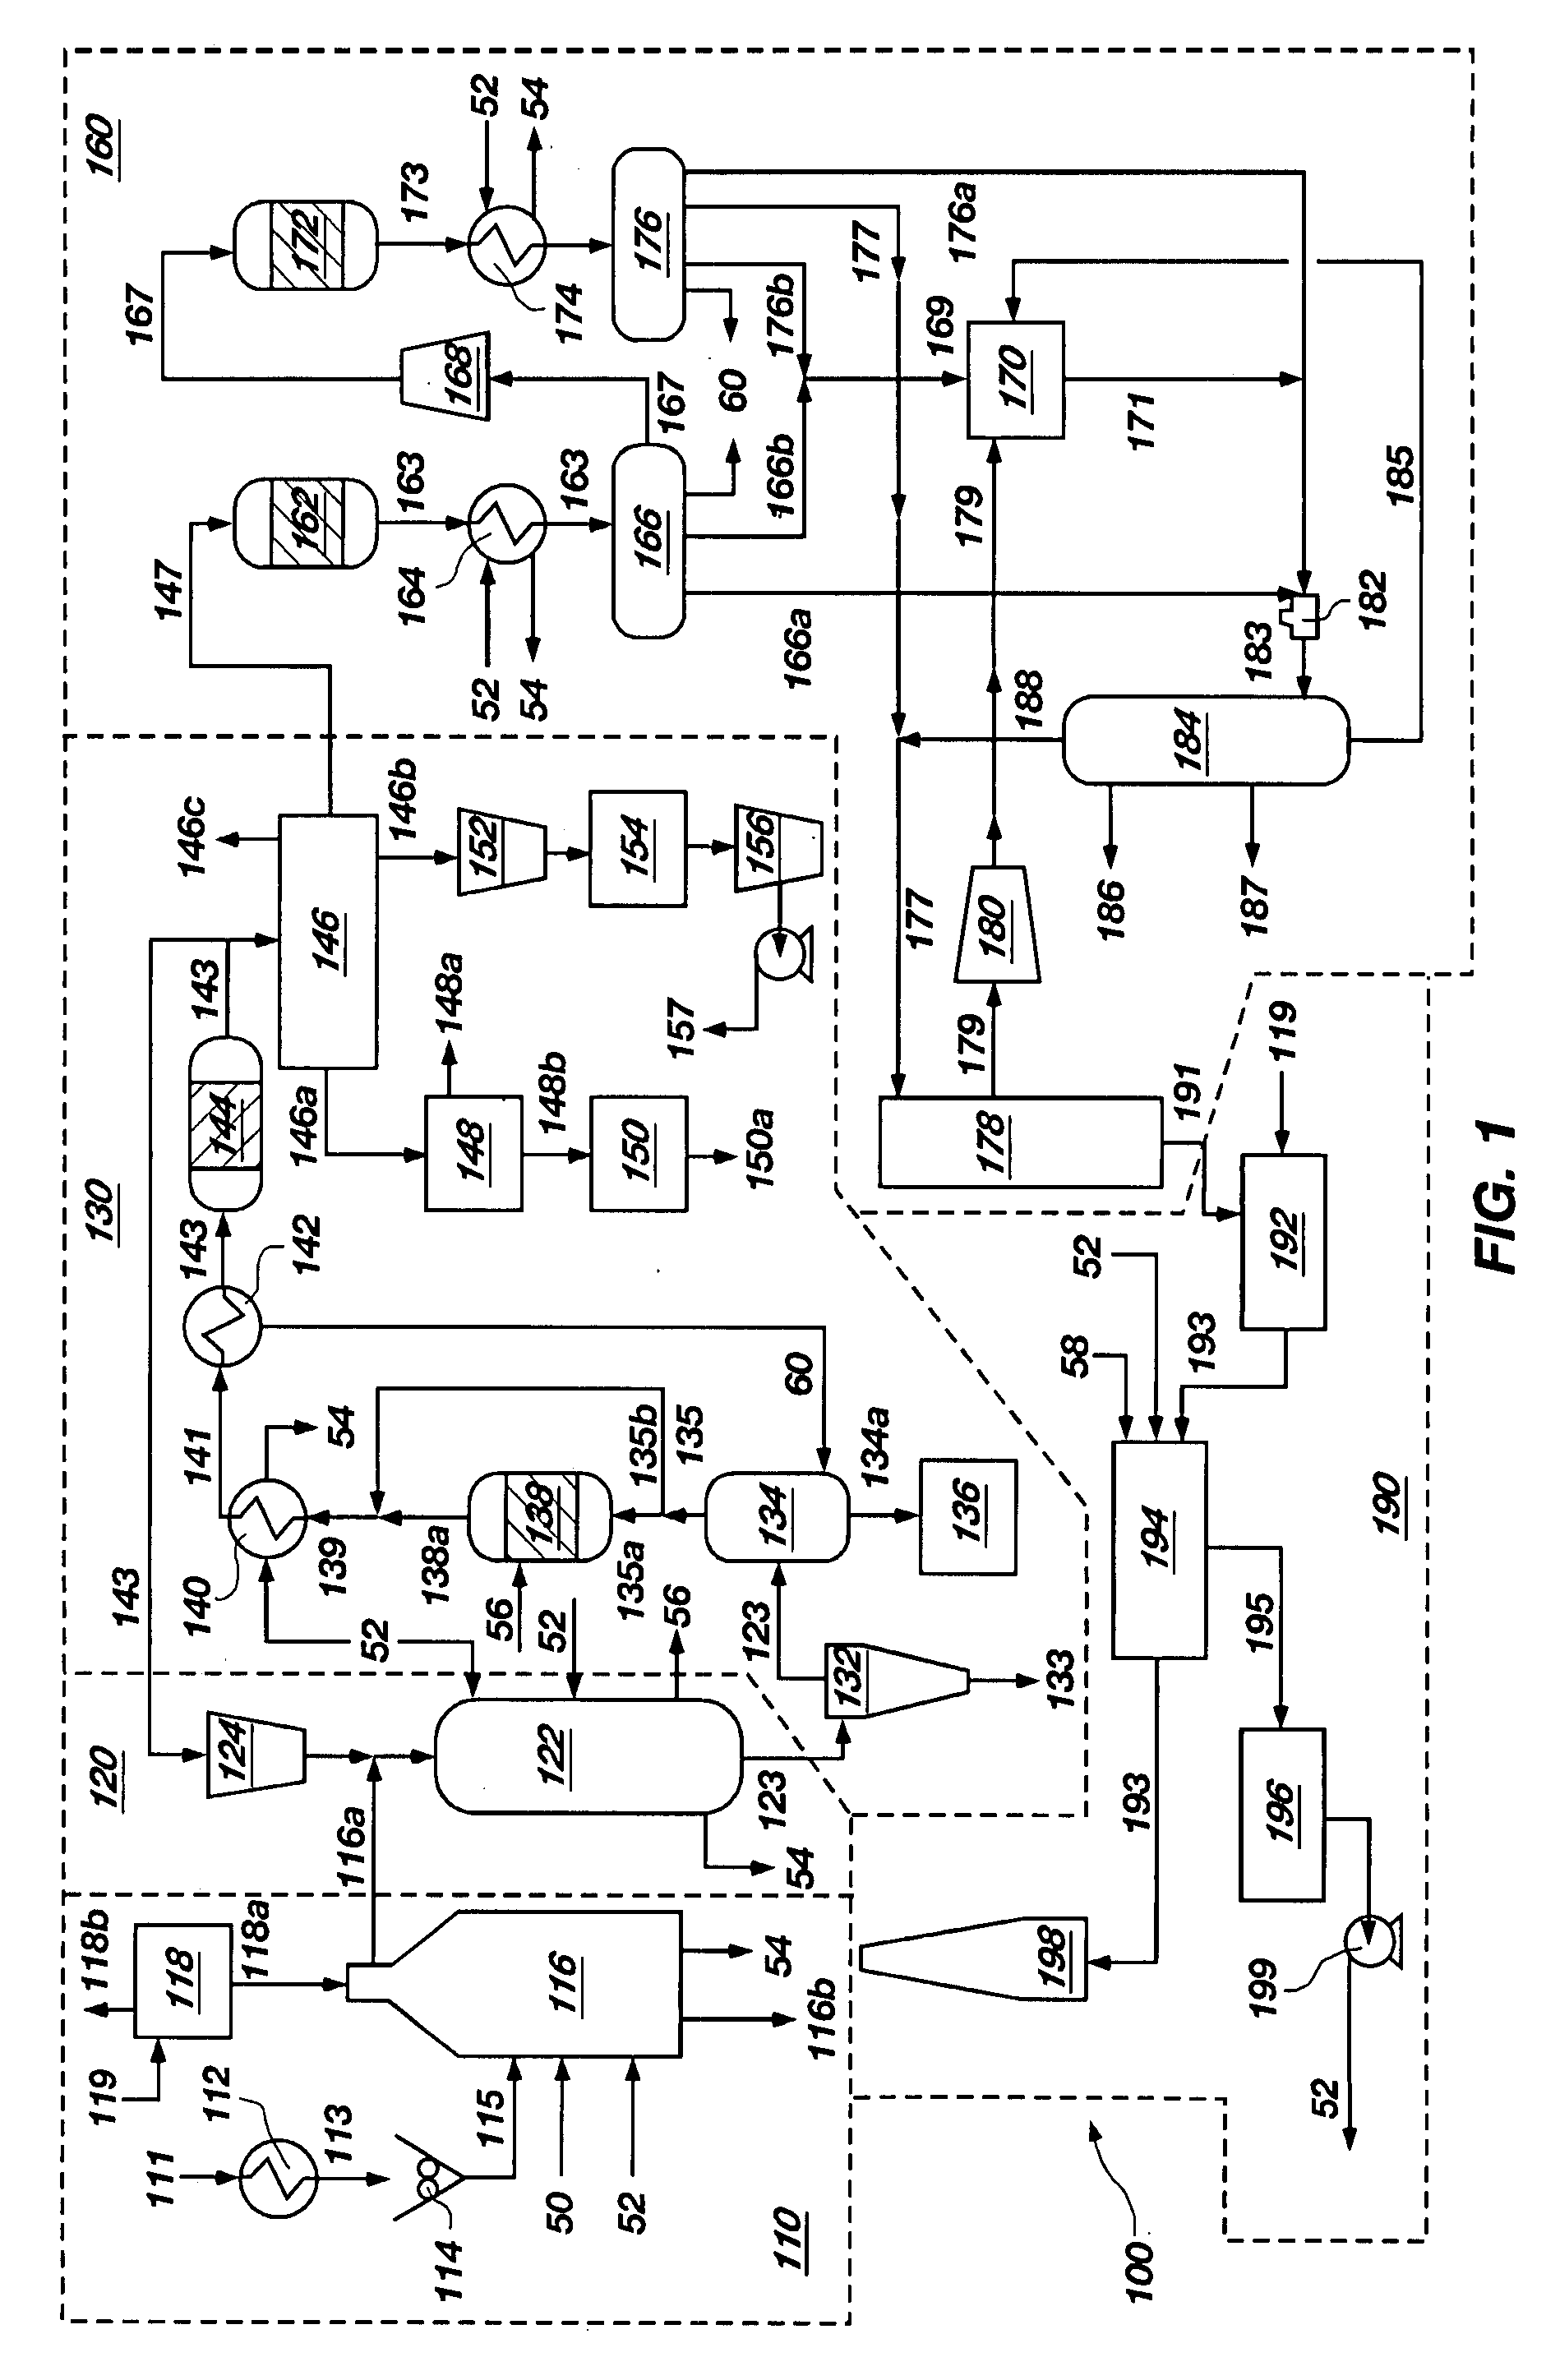 Synthetic fuel production methods and apparatuses